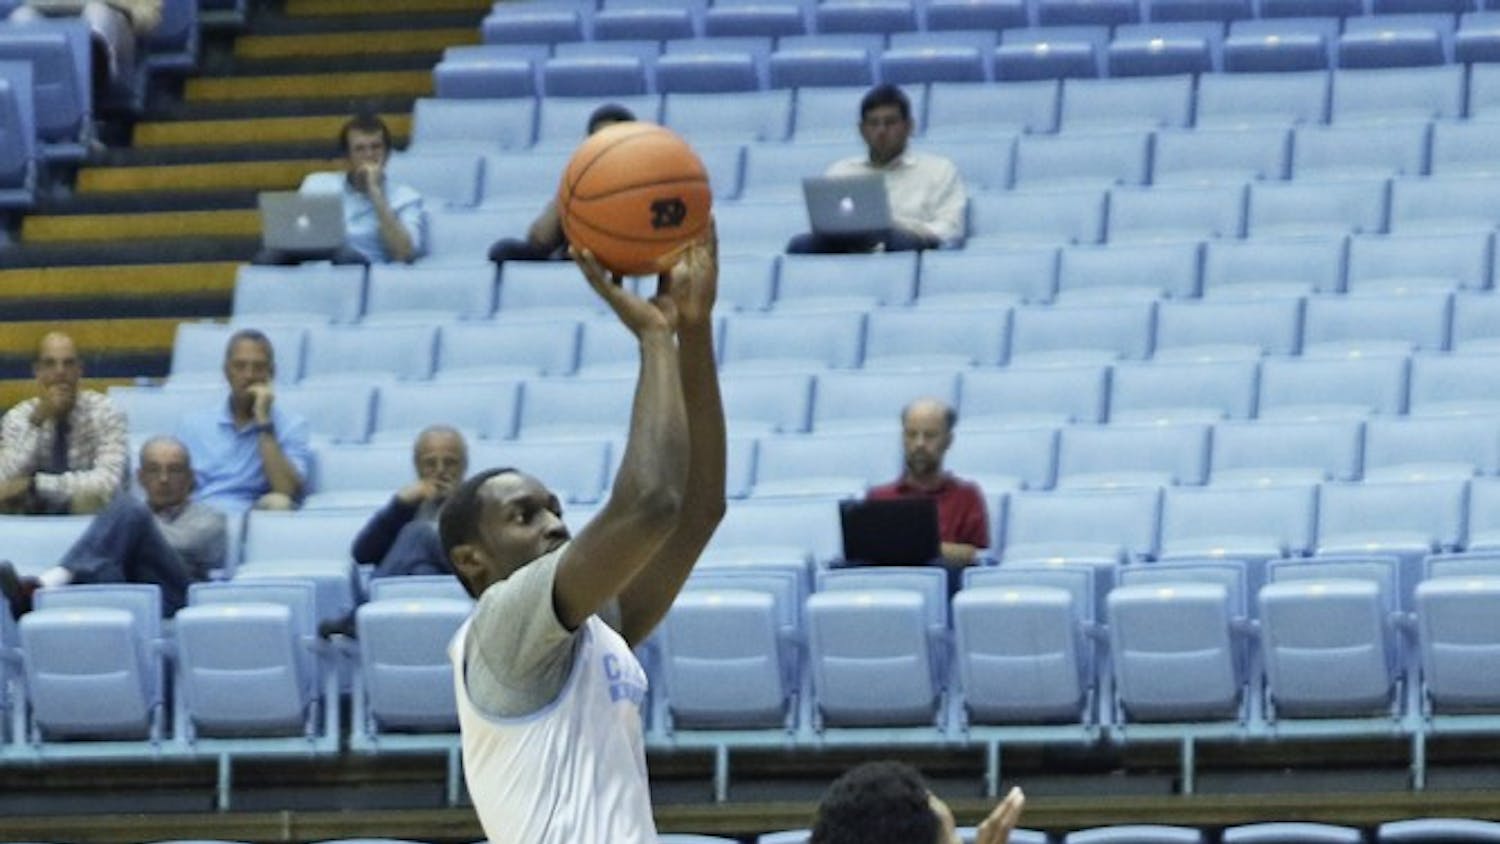 UNC forward Theo Pinson (1)&nbsp;pulls up for a shot over guard&nbsp;Nate Britt (0) during practice on&nbsp;UNC Media Day on October 11th. Pinson has since fractured his foot and is out indefinitely.&nbsp;